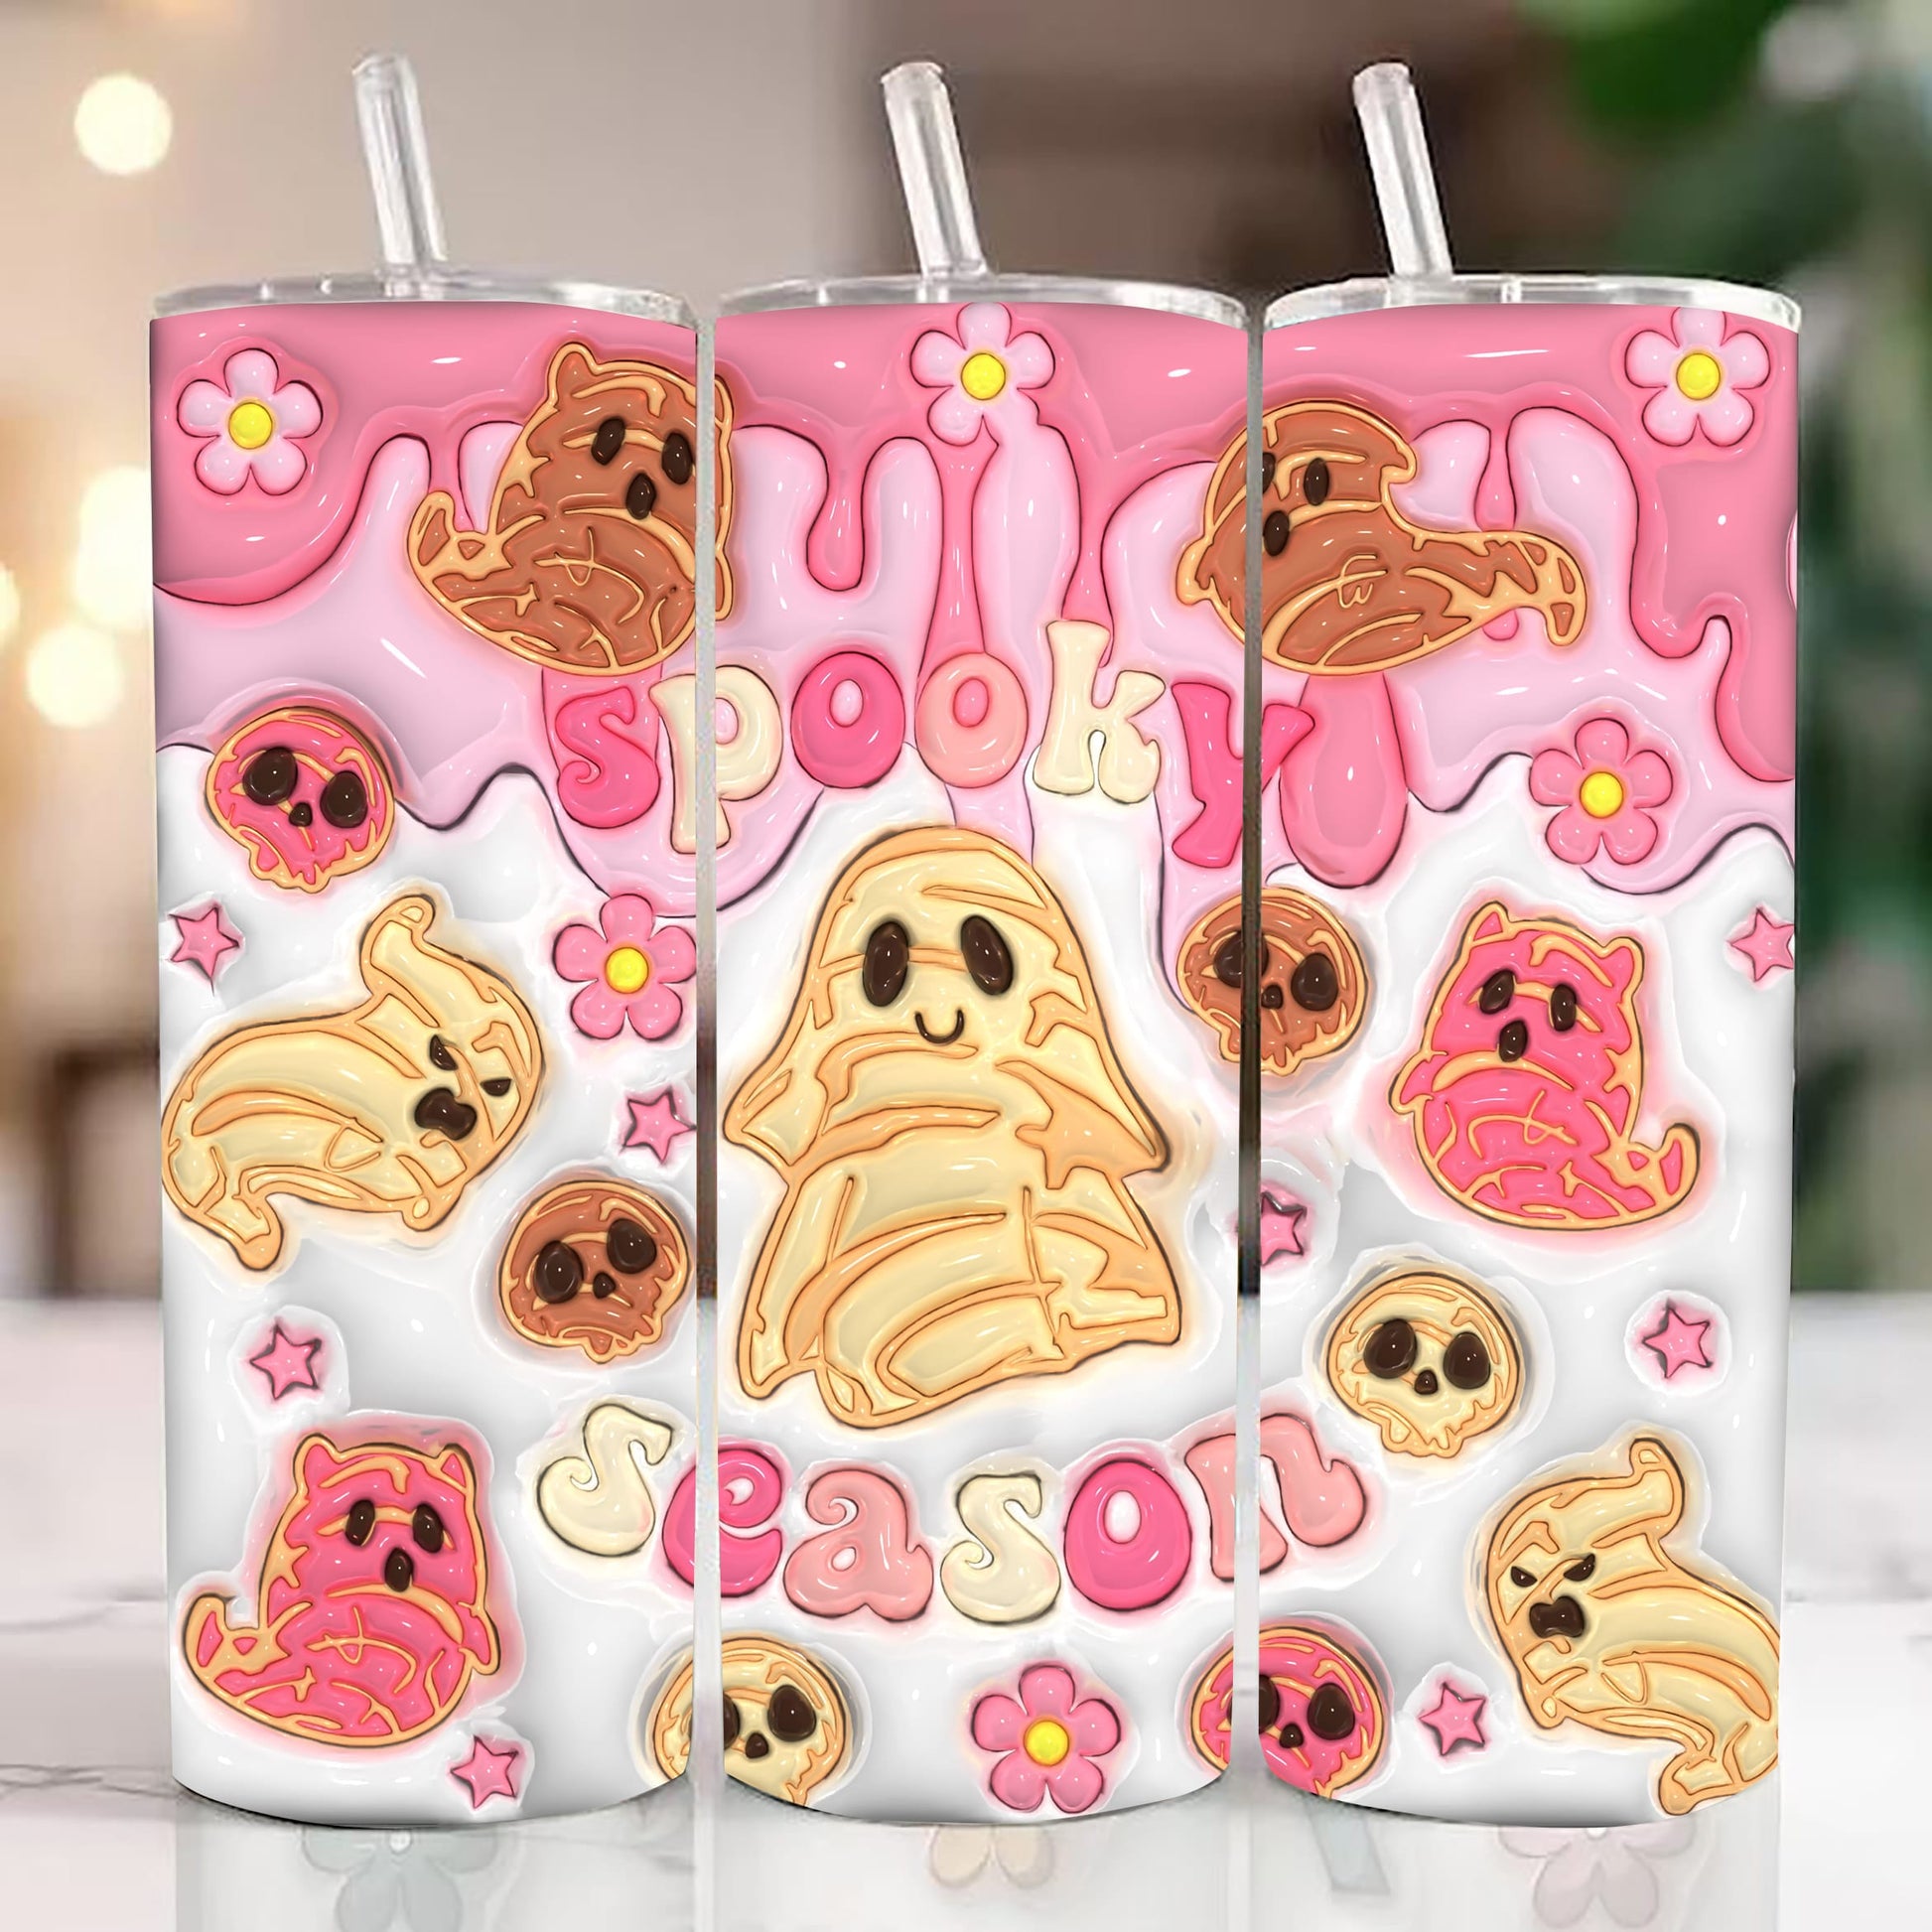 3D Spooky Conchas Inflated Tumbler Wrap, Mexican Pan Dulce Ghost, Puffy Halloween Conchas Ghost Tumbler Wrap, Mexican Conchas, Spooky Vibes - VartDigitals